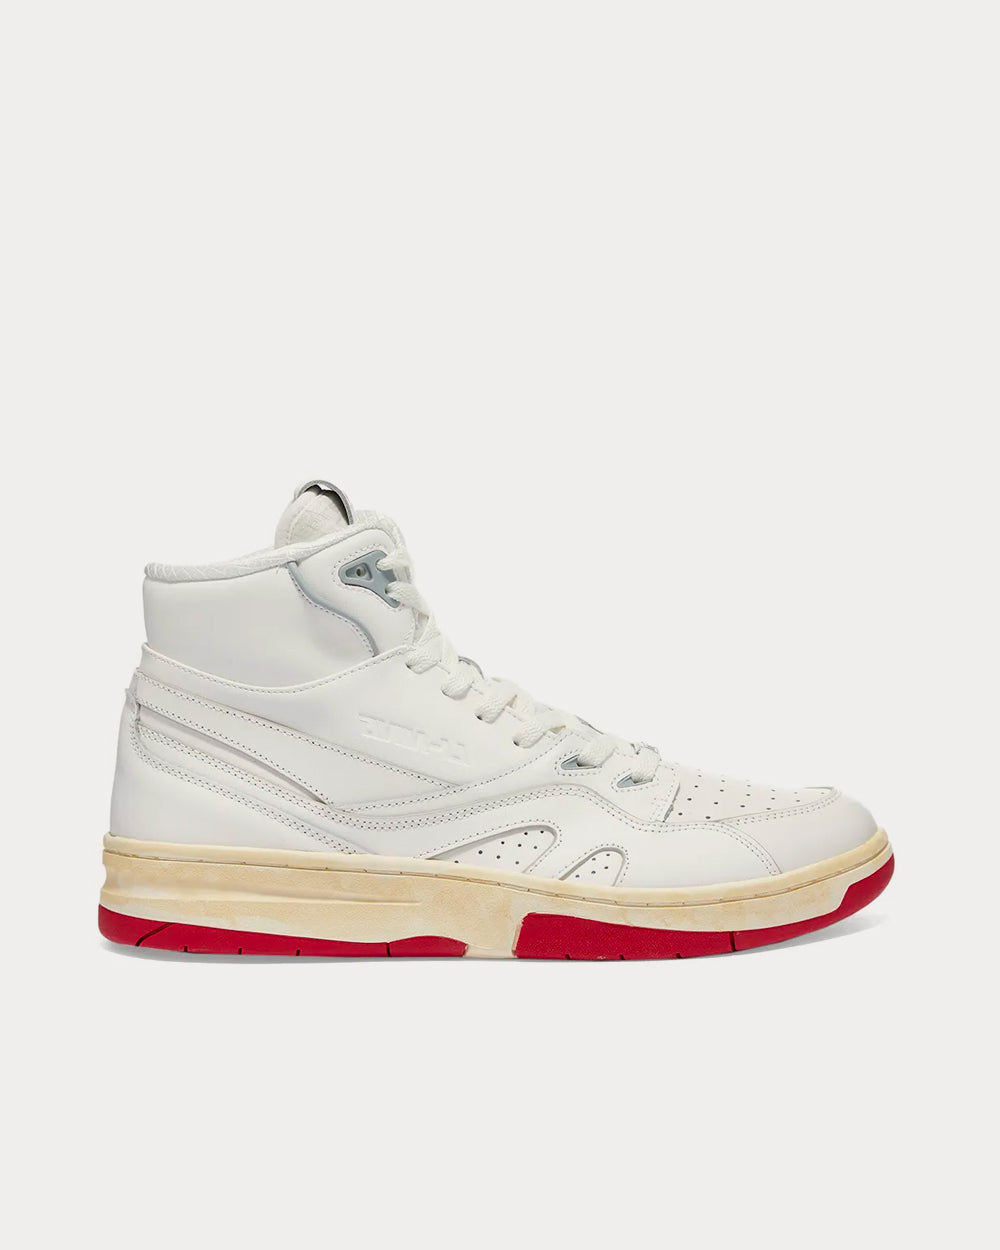 Li-Ning - 937 Deluxe Bright White High Top Sneakers